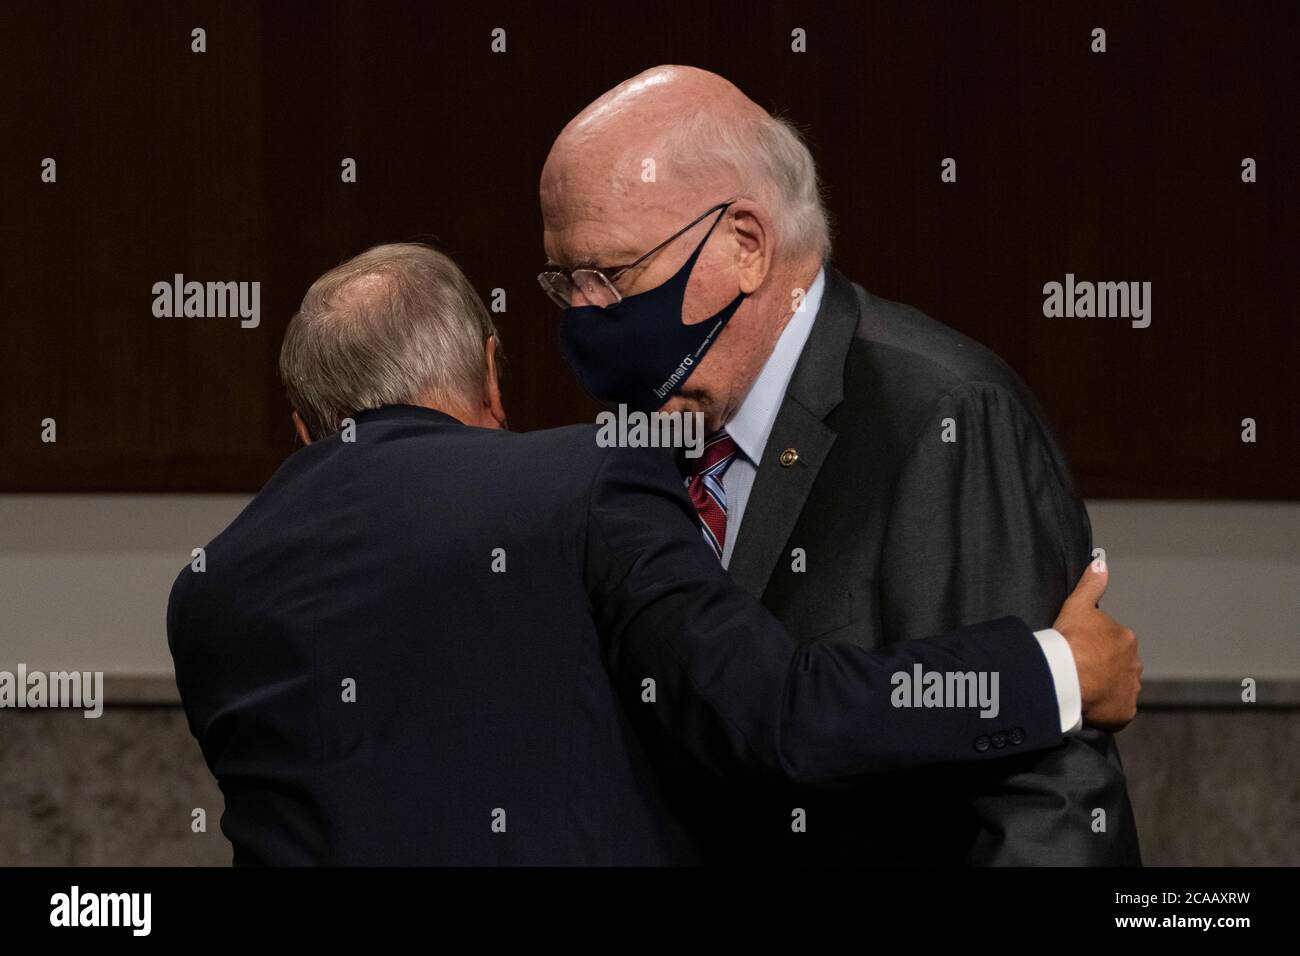 United States Senator Lindsey Graham (Republican of South Carolina), Chairman, US Senate Judiciary Committee, left, embraces US Senator Patrick Leahy (Democrat of Vermont), during a US Senate Judiciary Committee oversight hearing on Capitol Hill in Washington, Wednesday, Aug. 5, 2020, to examine the Crossfire Hurricane investigation. Credit: Carolyn Kaster/Pool via CNP /MediaPunch Stock Photo